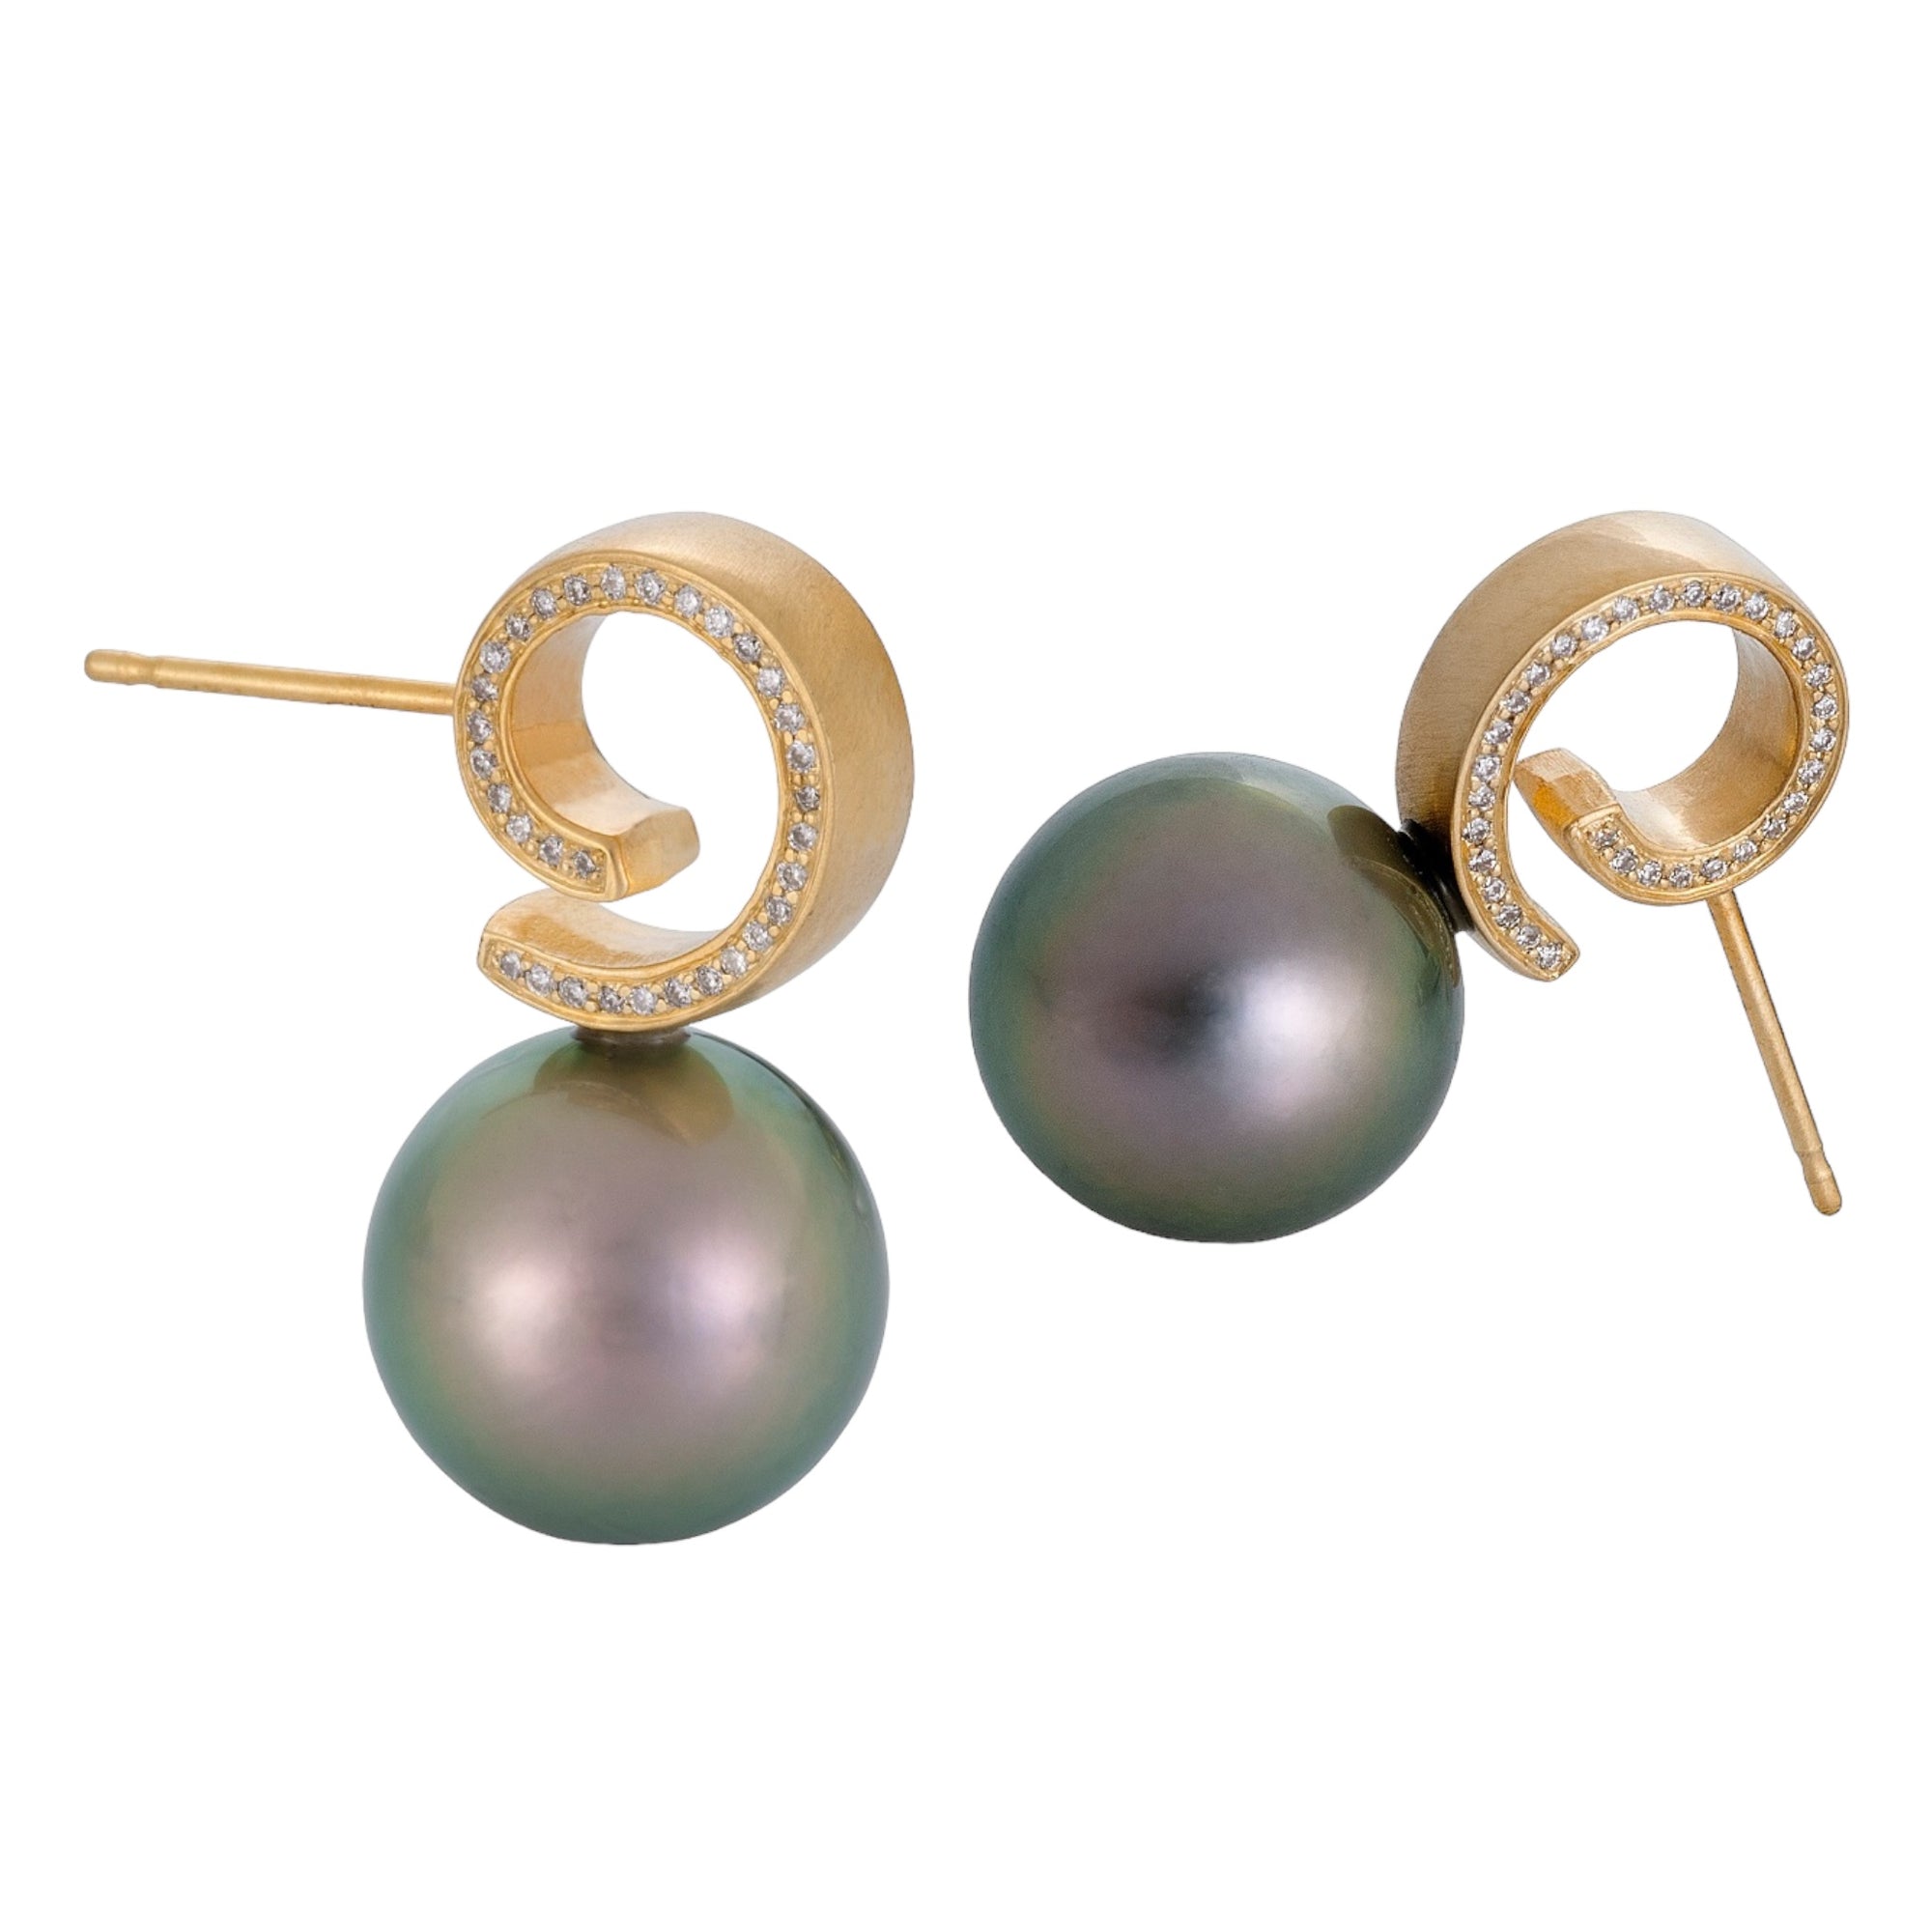 Cirrus Tahitian Pearl Earrings  by Martha Seely available at Talisman Collection Fine Jewelers in El Dorado Hills, CA and online. Stats: The swirling clouds serve as the muse for these stunning 14k earrings. Adorned with Tahitian Pearls and a row of 32 glimmering diamonds totaling .9 cts, each earring boasts a subtle yet elegant satin finish, perfect for both daywear and formal events. Measuring 0.9" from top to bottom, these earrings exude an air of sophistication and refinement.